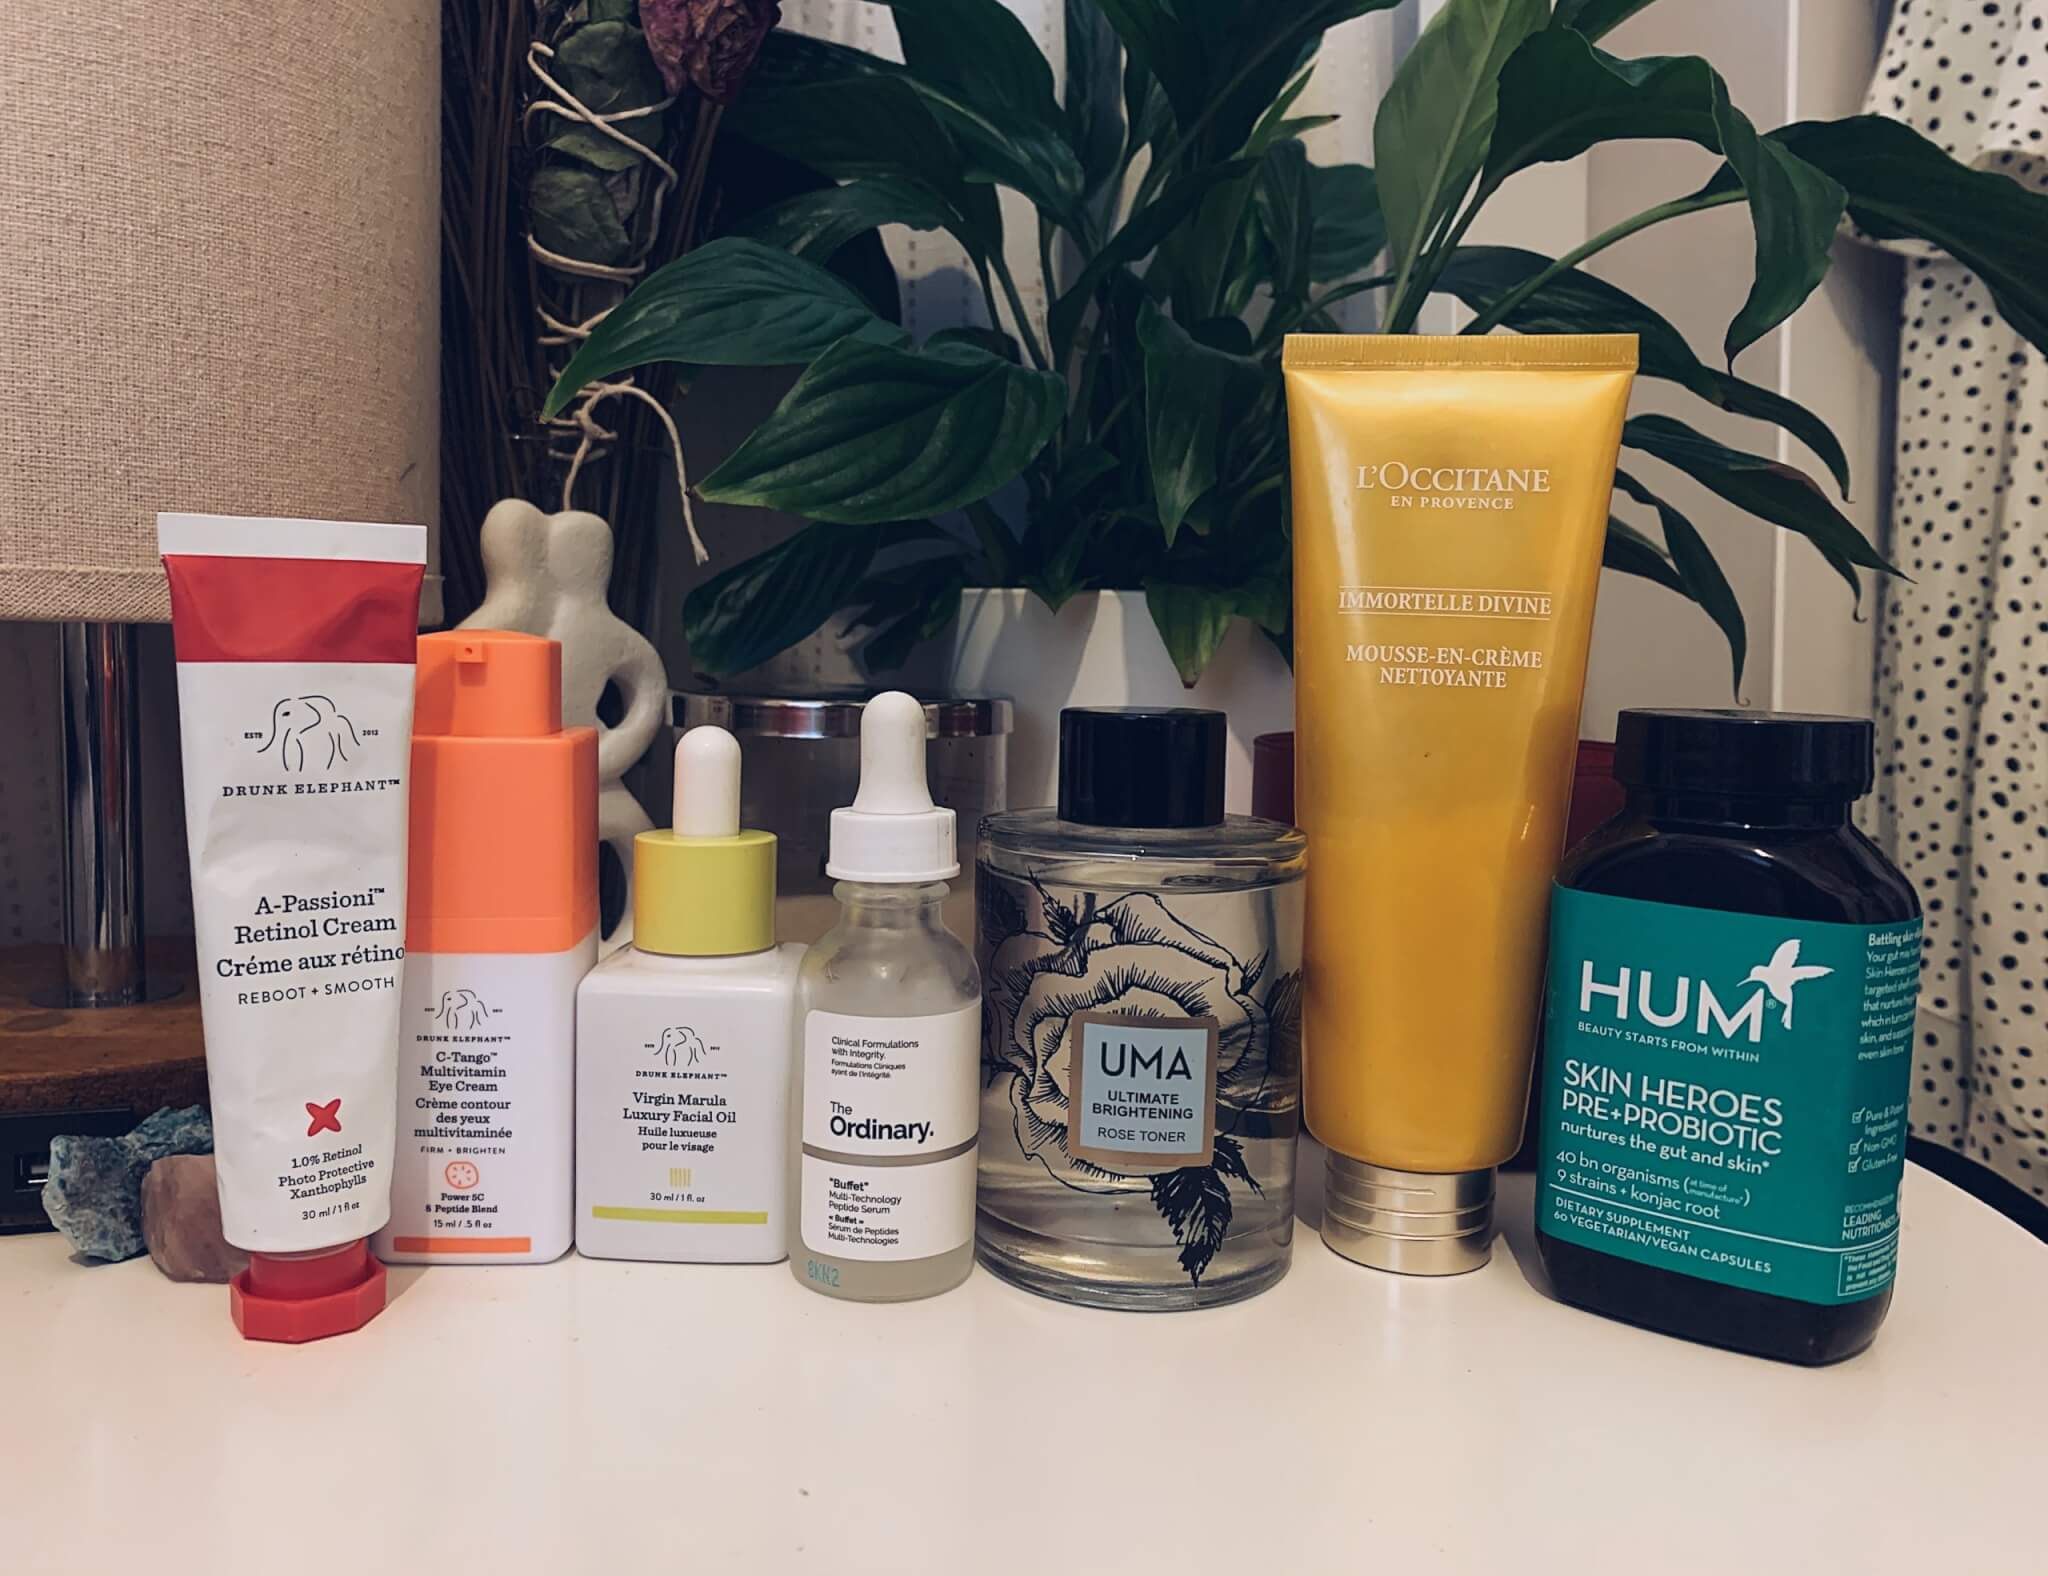 My simple everyday anti-ageing routine